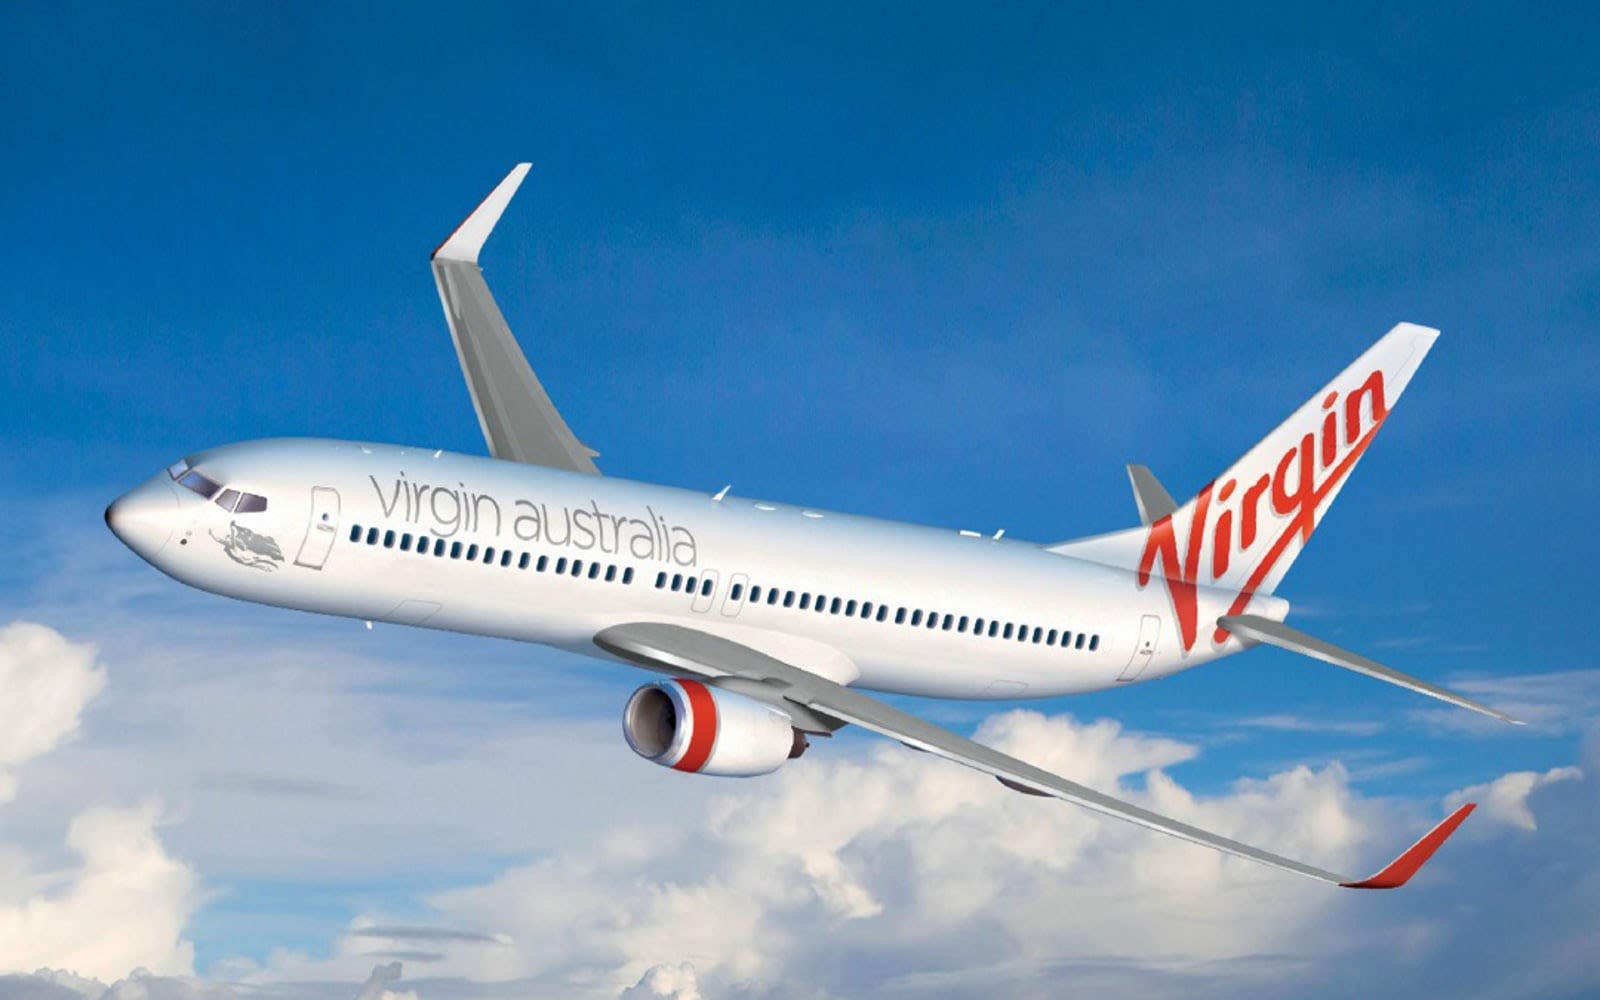 MNH supports Virgin Australia with their Laundry Management